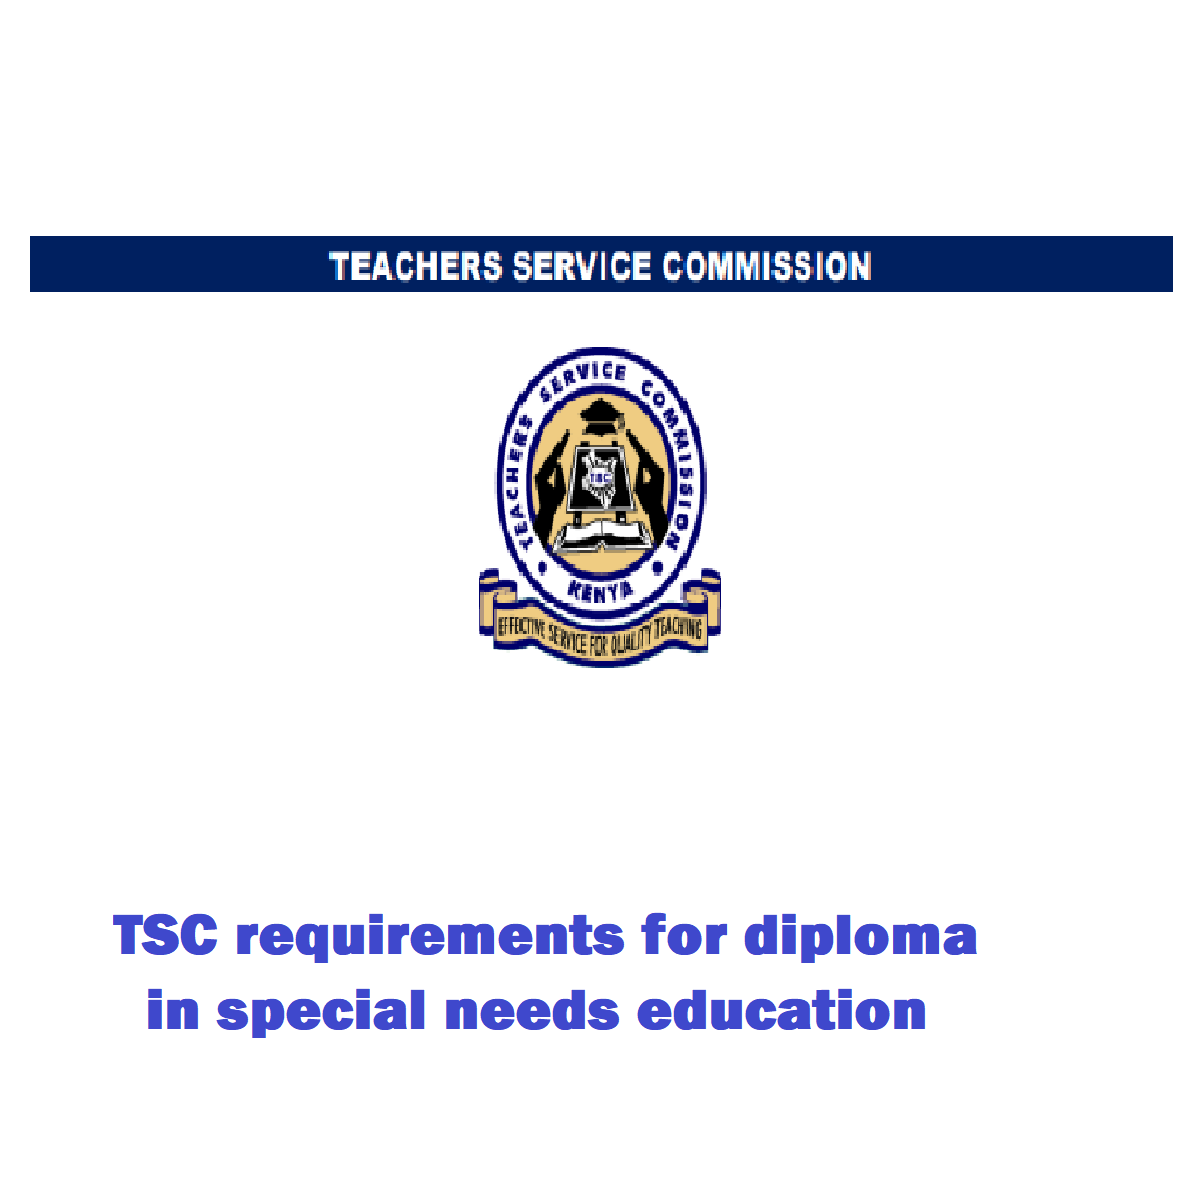 TSC requirements for diploma in special needs education